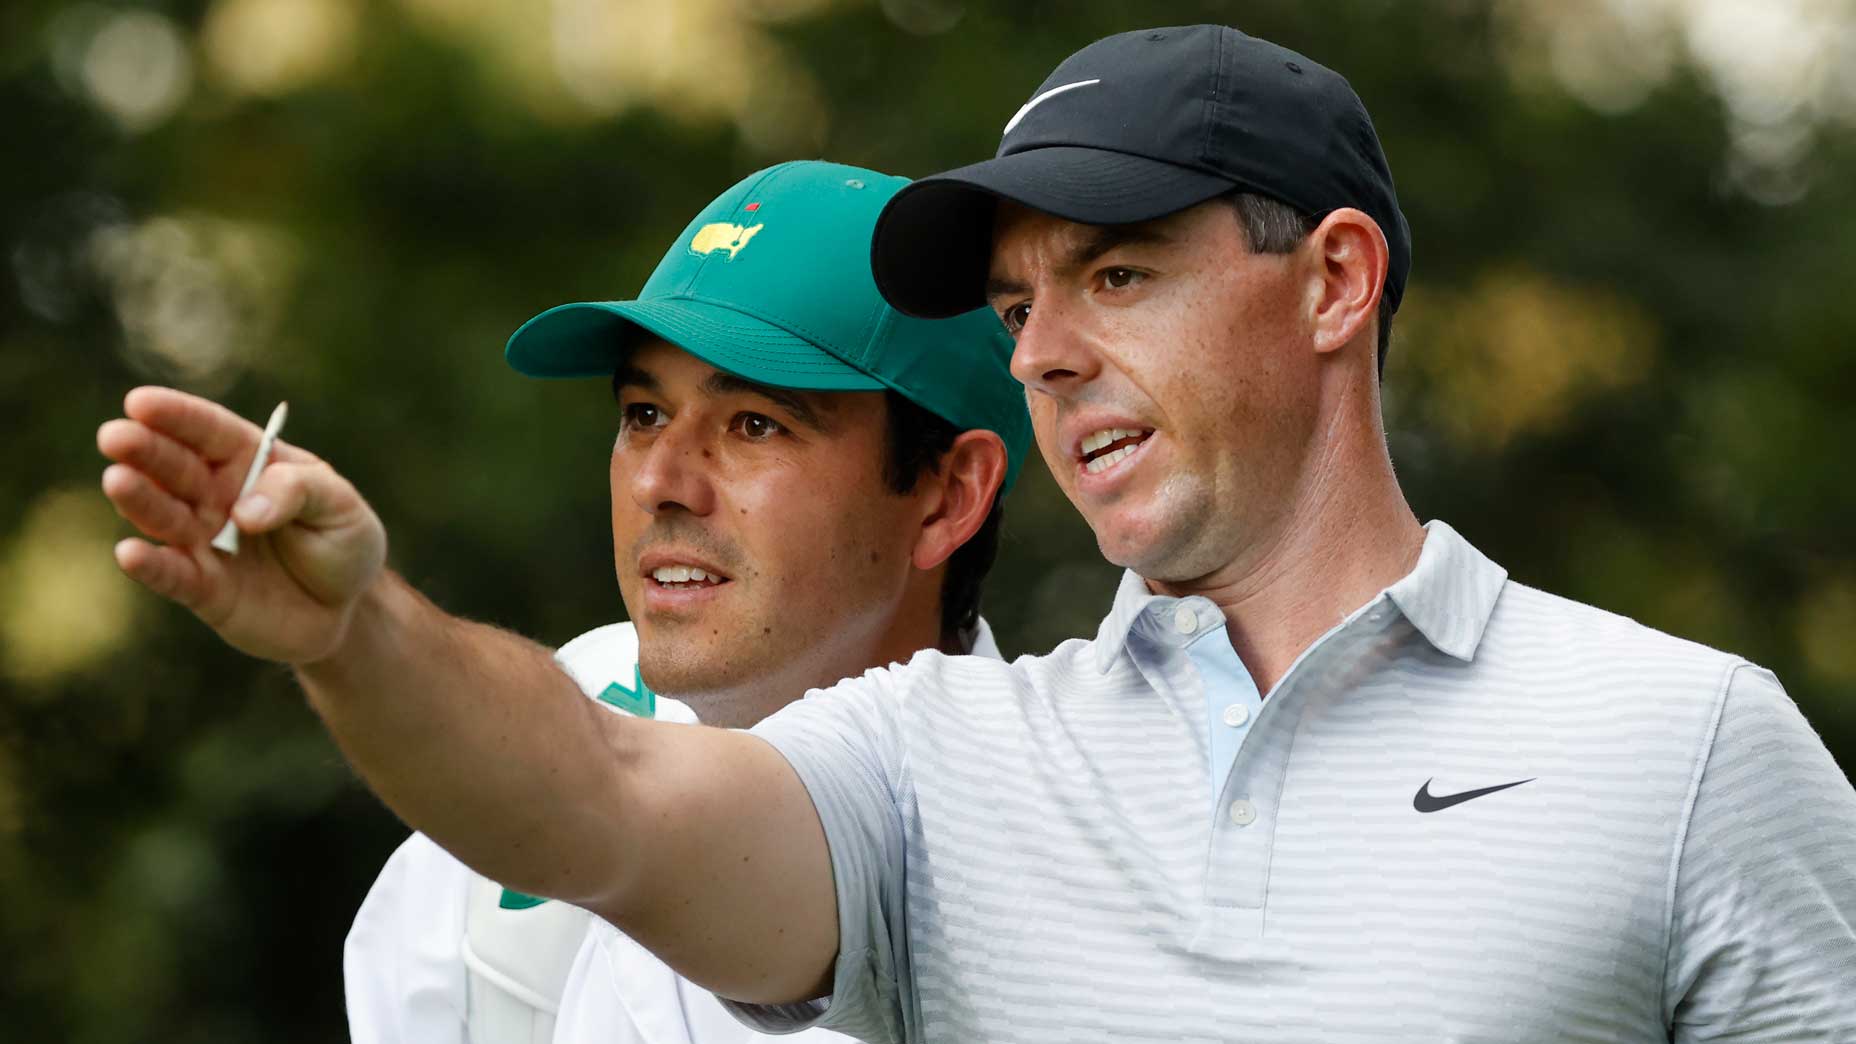 Rory McIlroy and his caddie point down fairway at 2020 Masters